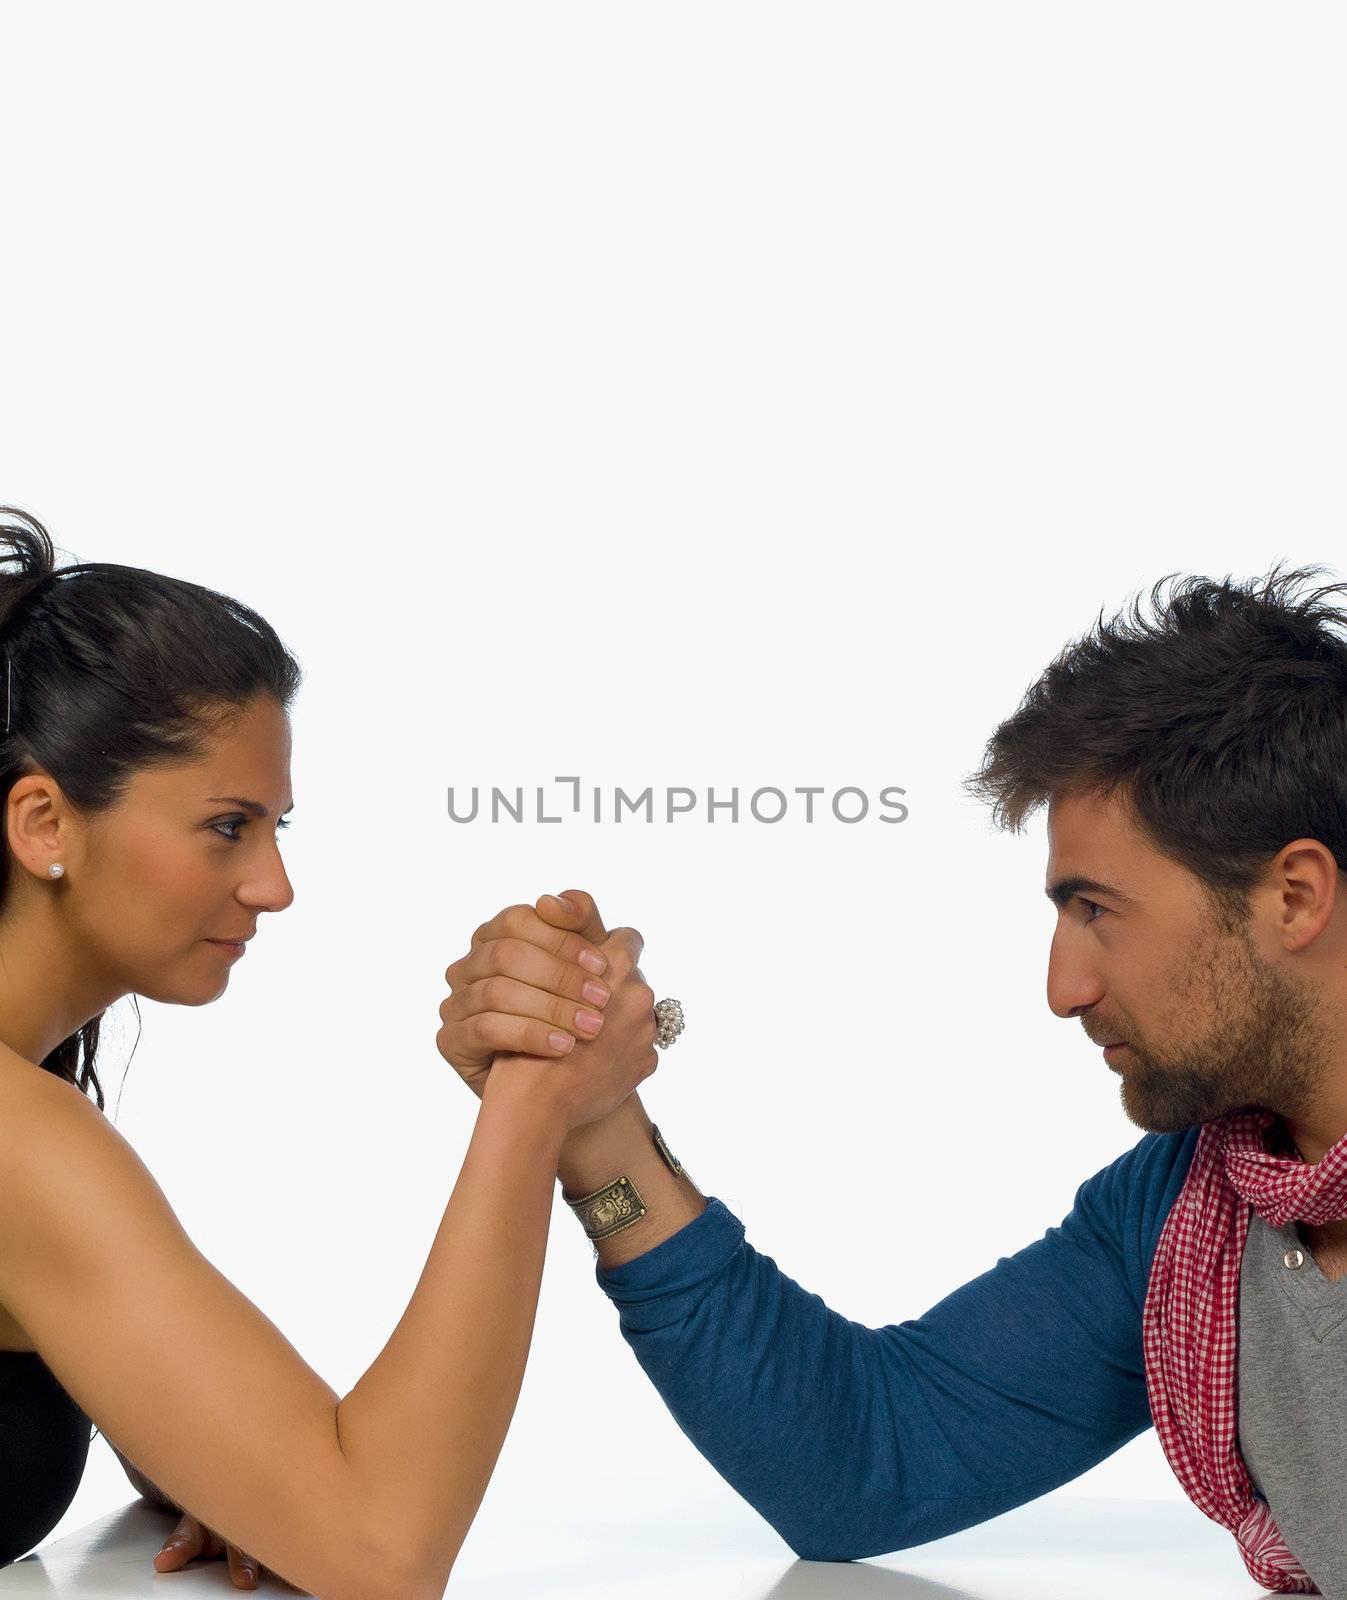 The battle of sexes, arm wrestling couple